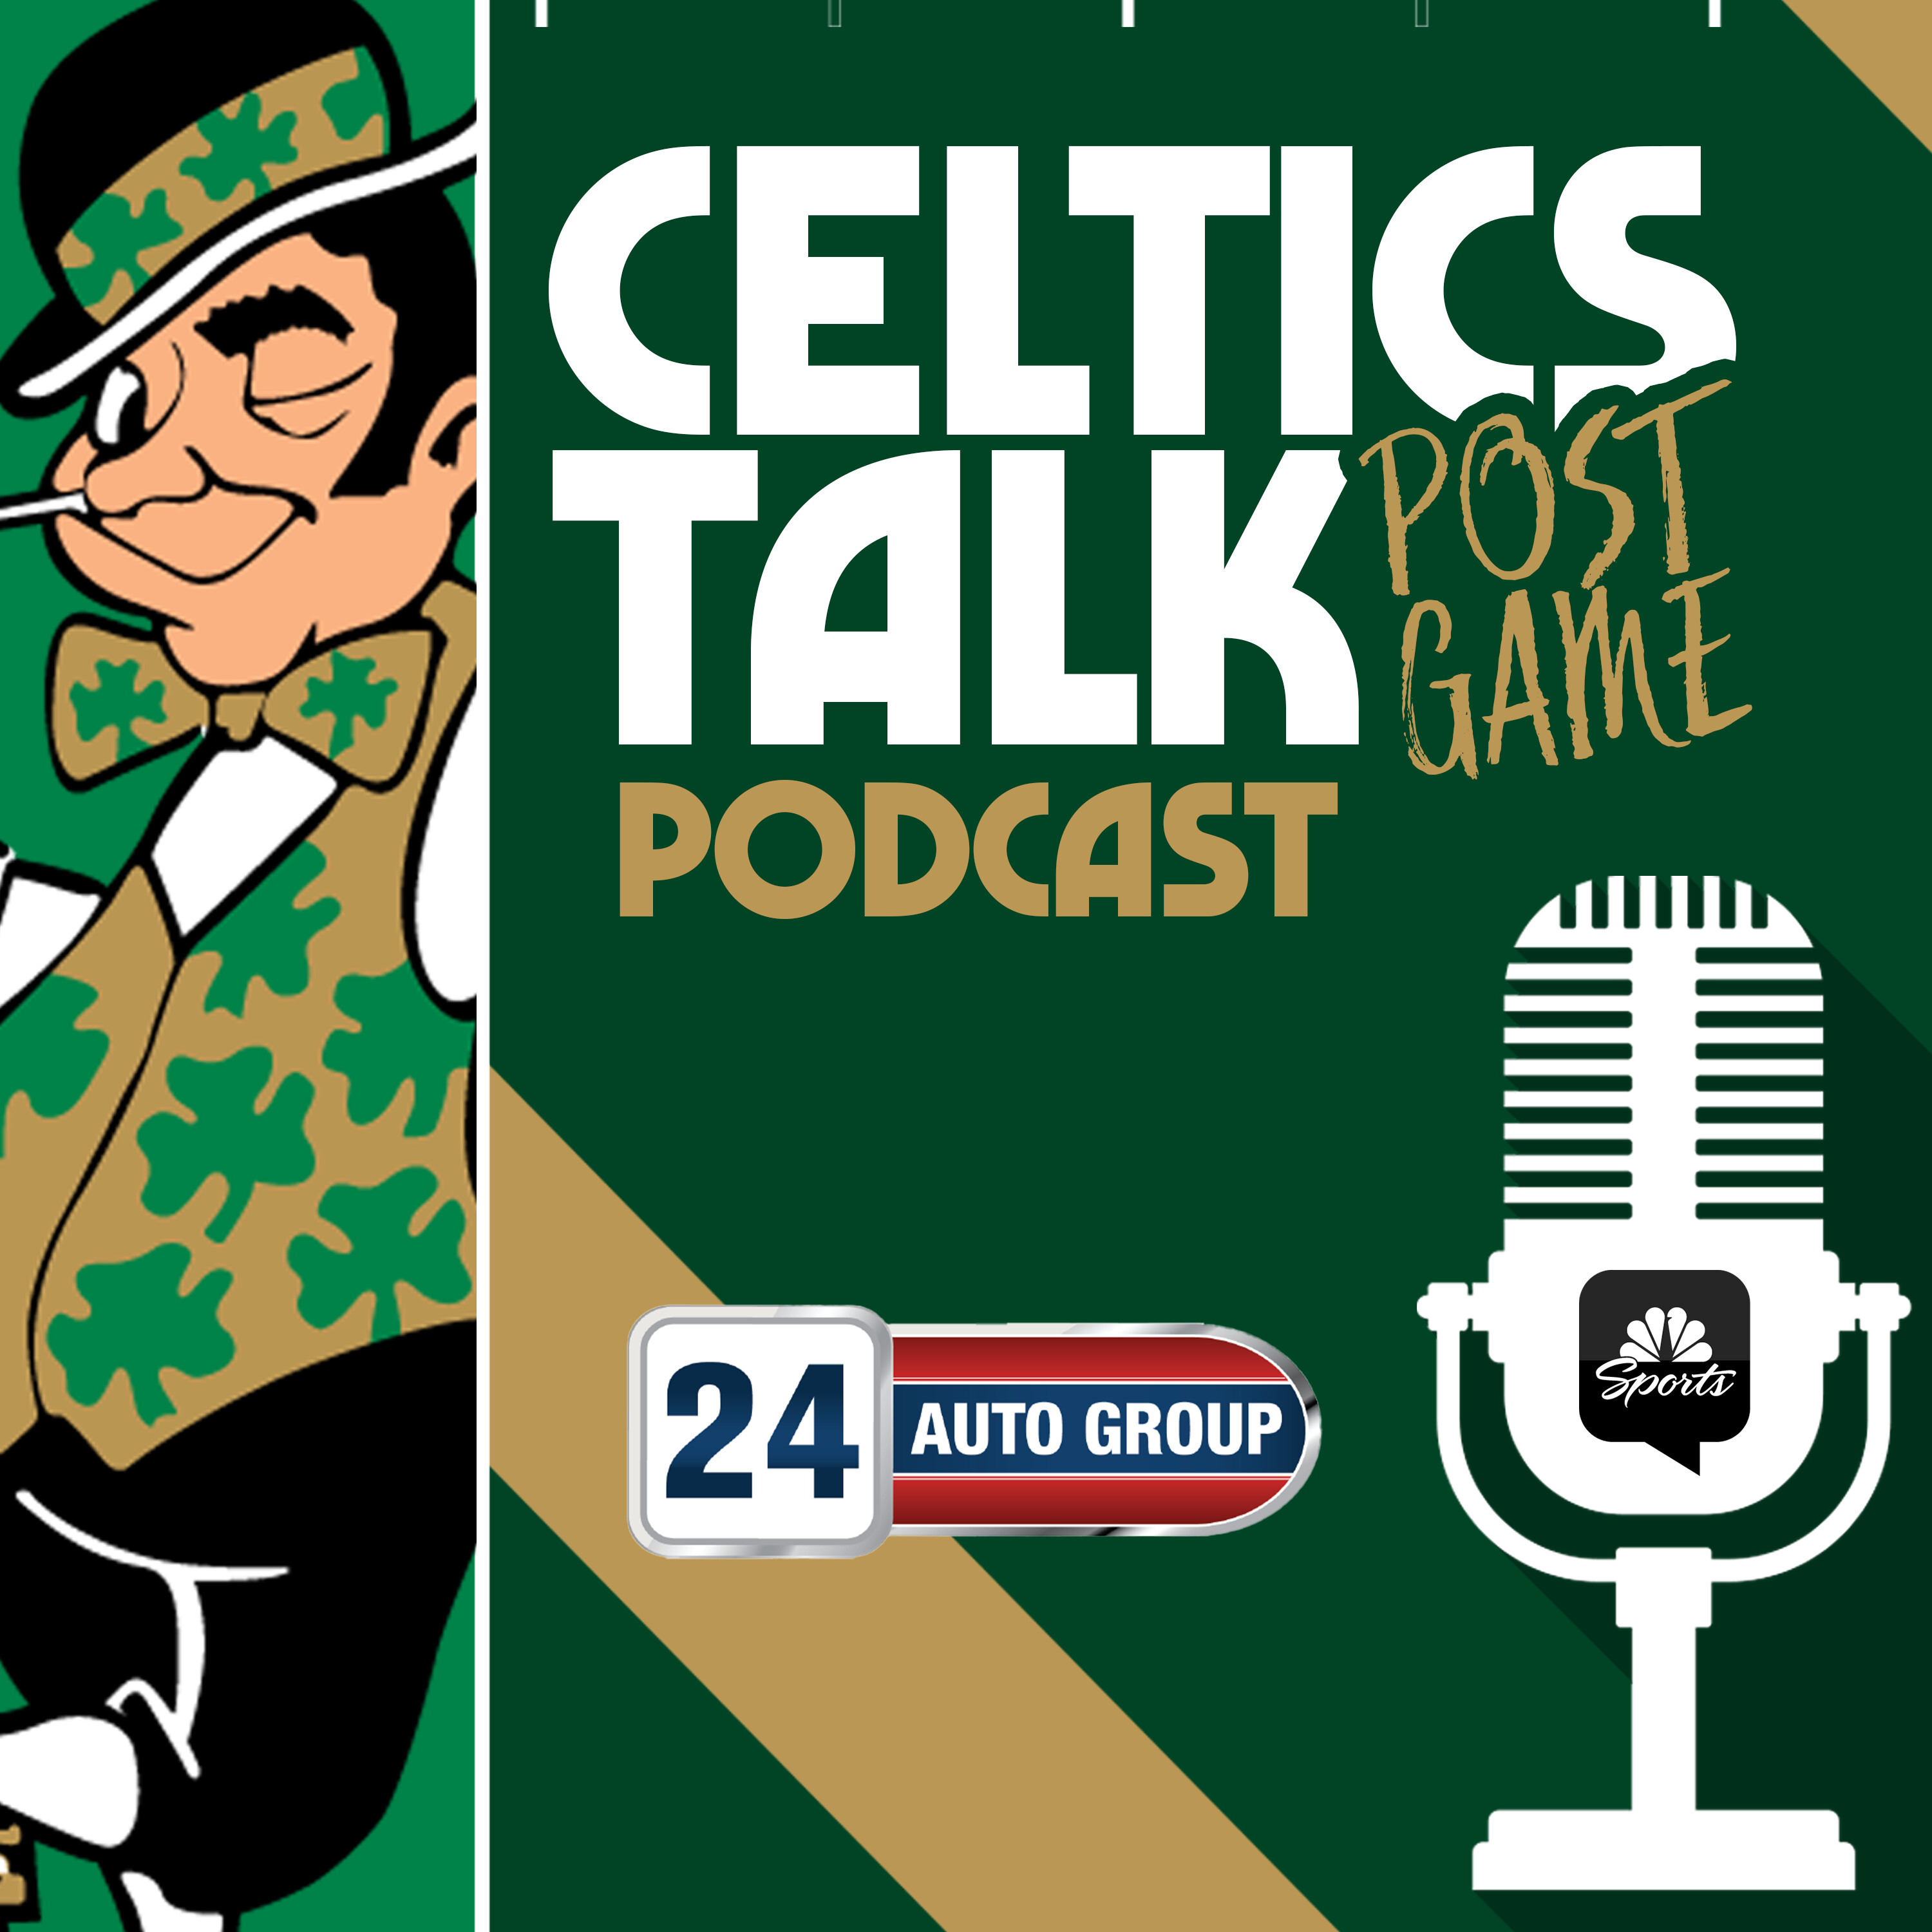 POSTGAME POD: Third quarter struggles, questionable foul calls late costs C’s vs. Pacers